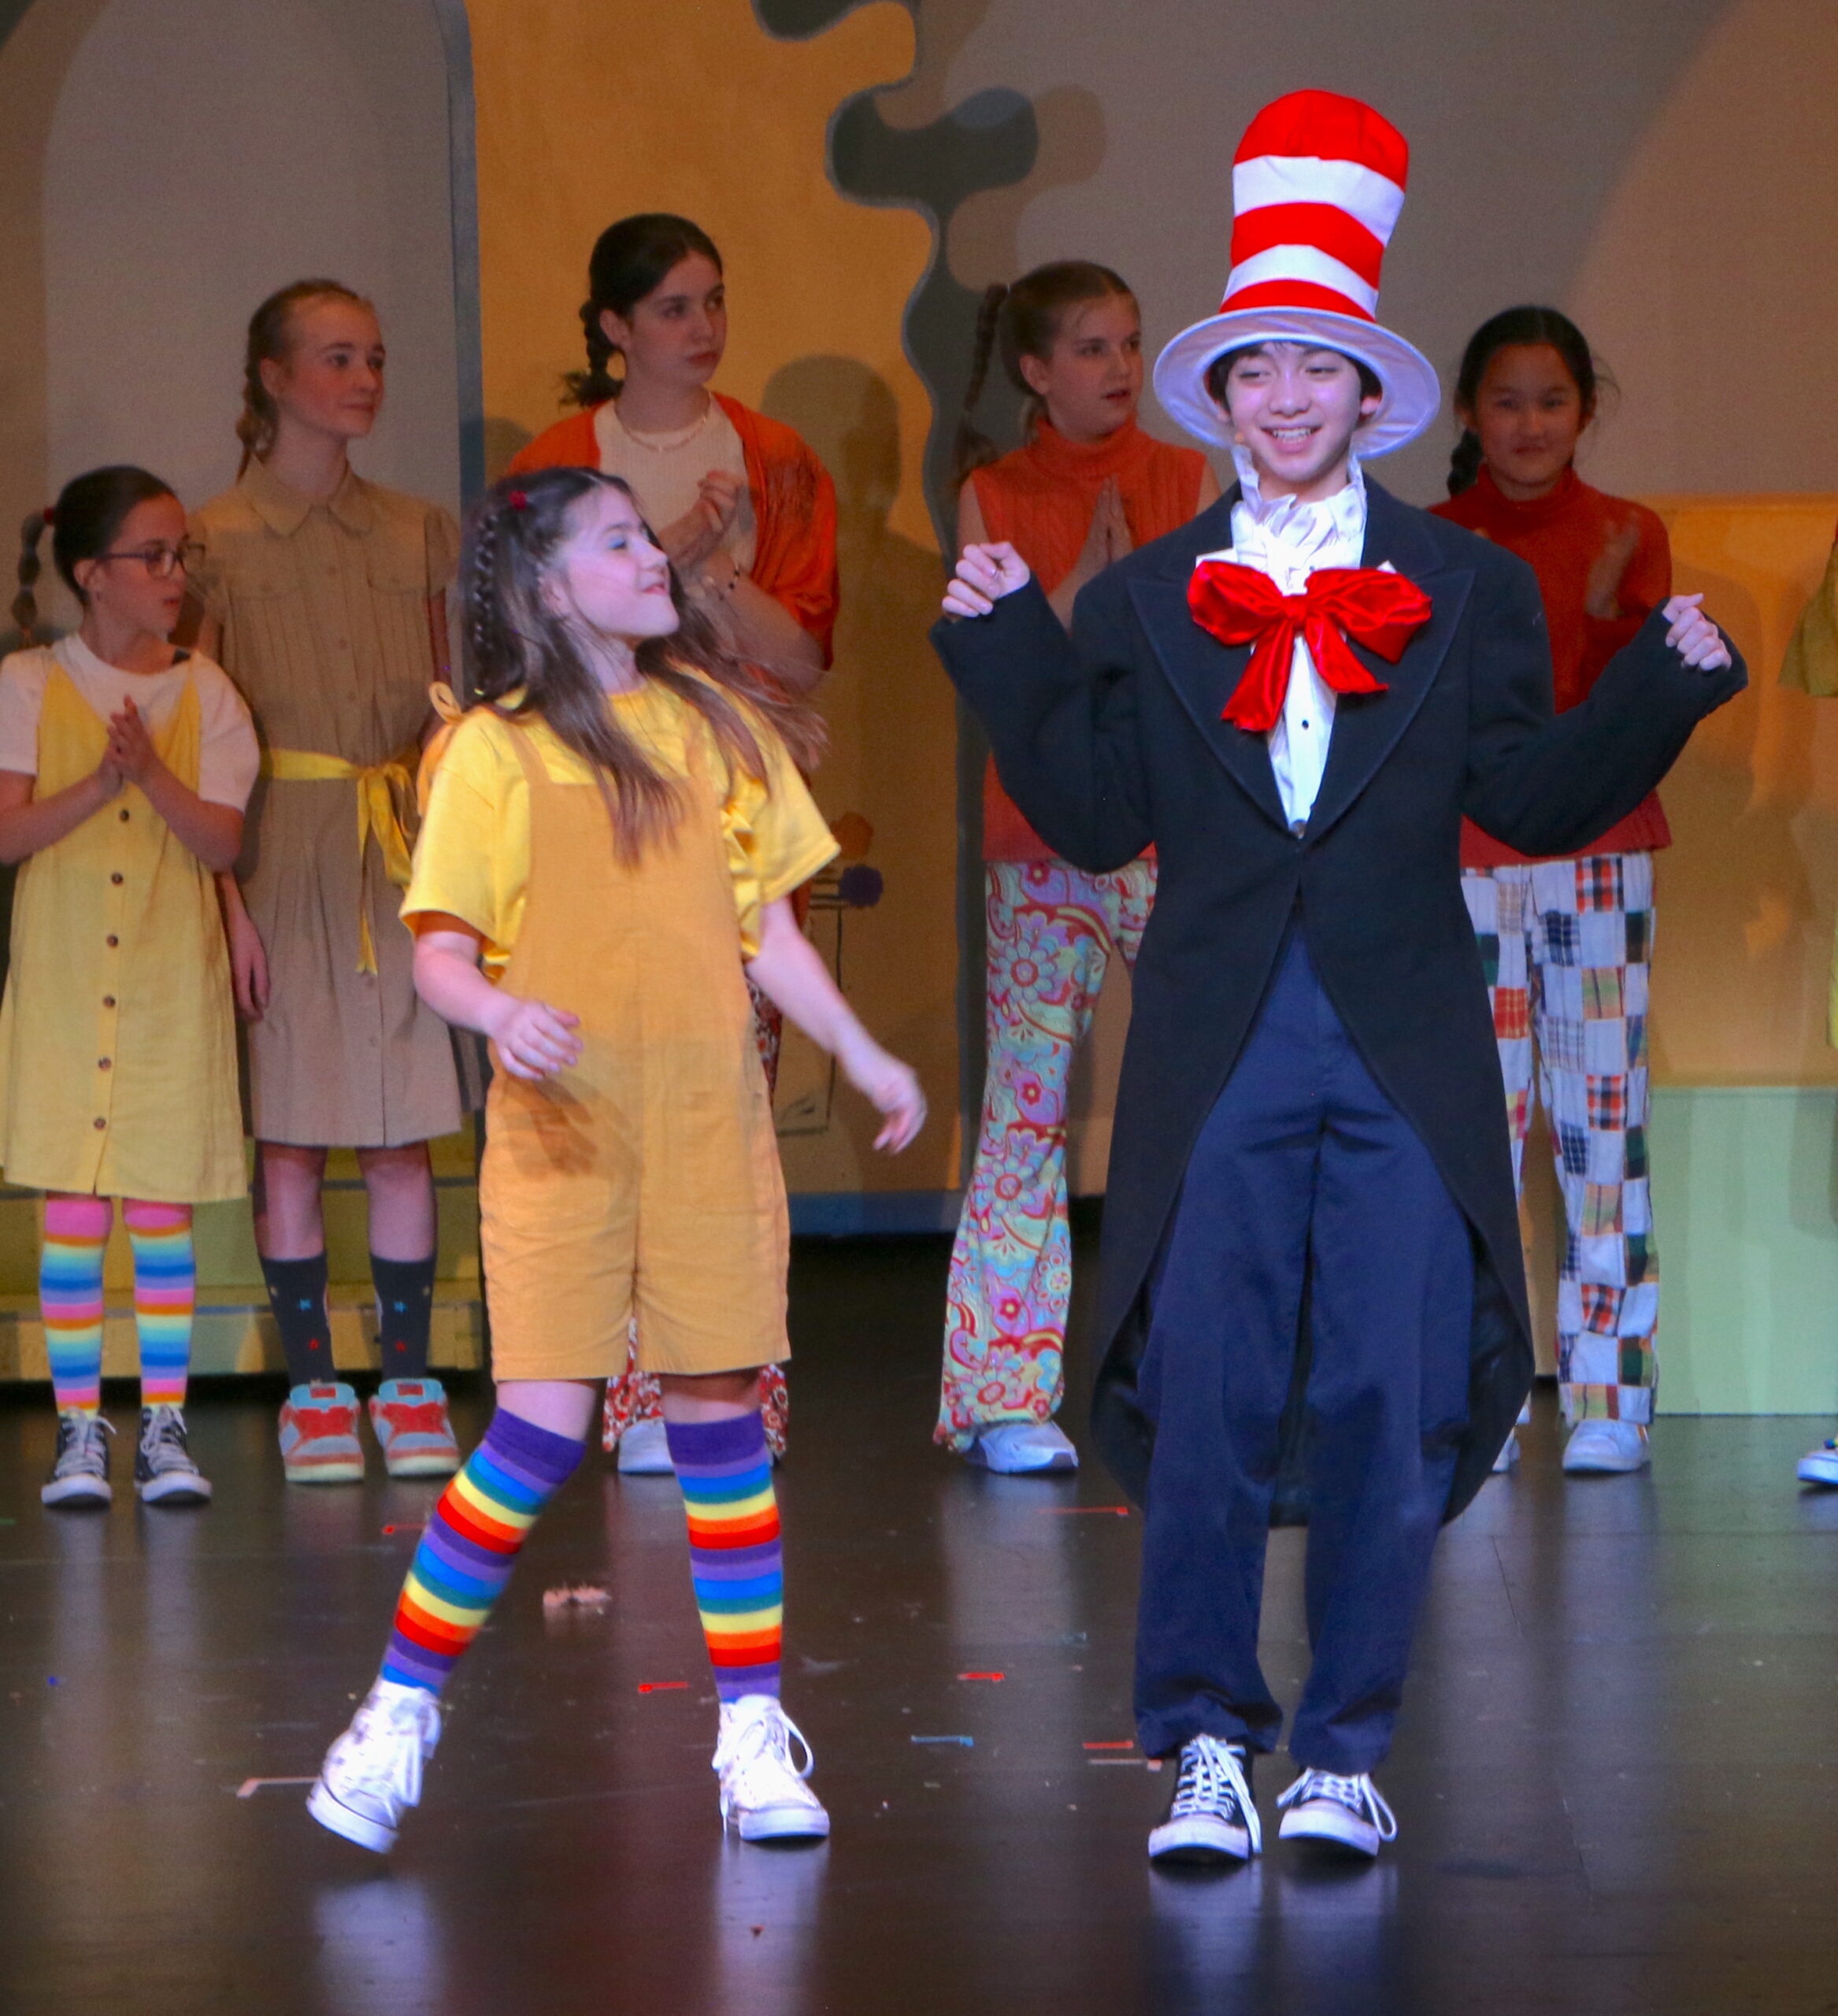 Students performing on stage - cat in the hat and a child front and center